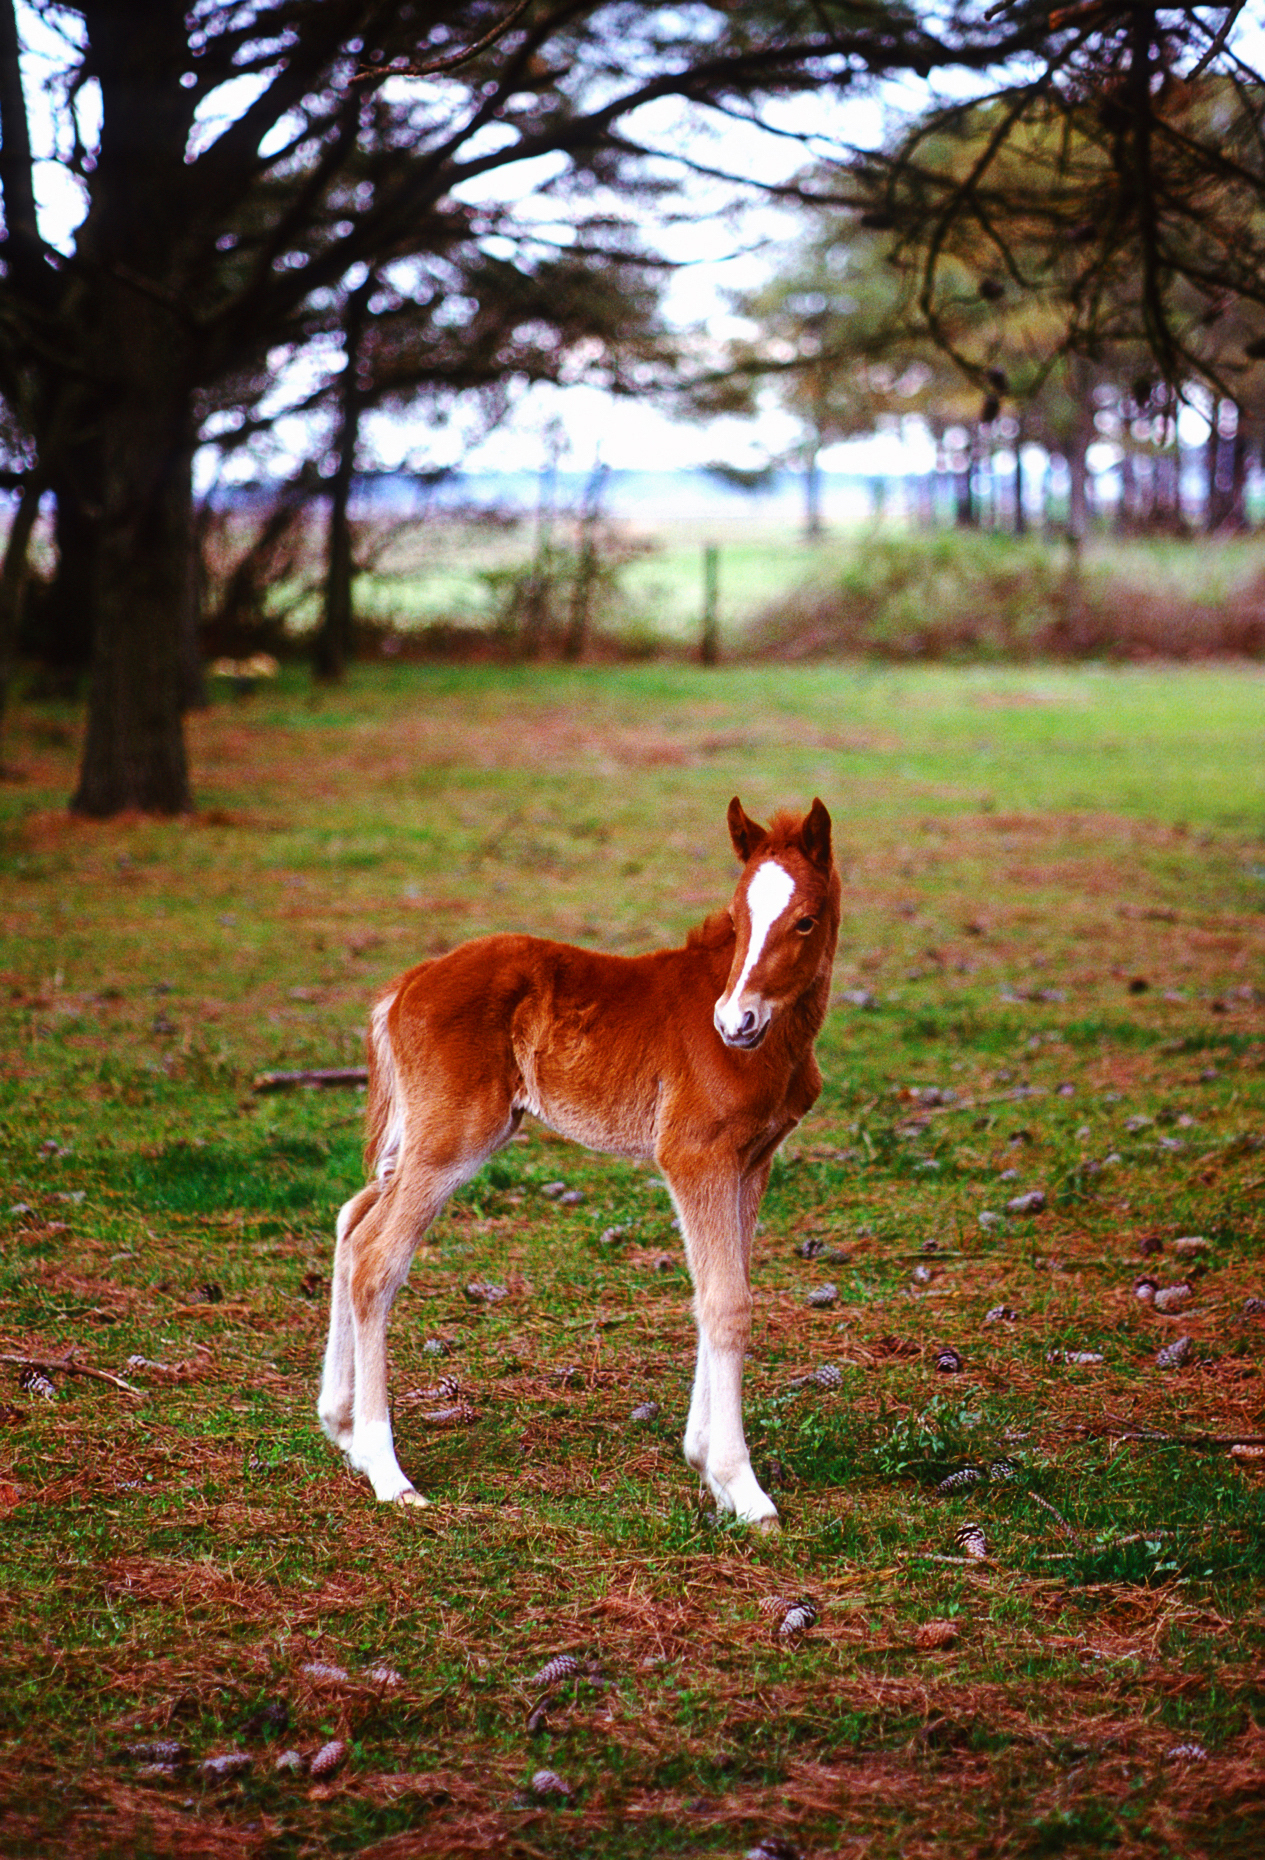 Young colt; wild horse (known as "Ponies") in Chincoteague National Wildlife Refuge, Assateague Island, Virginia, USA